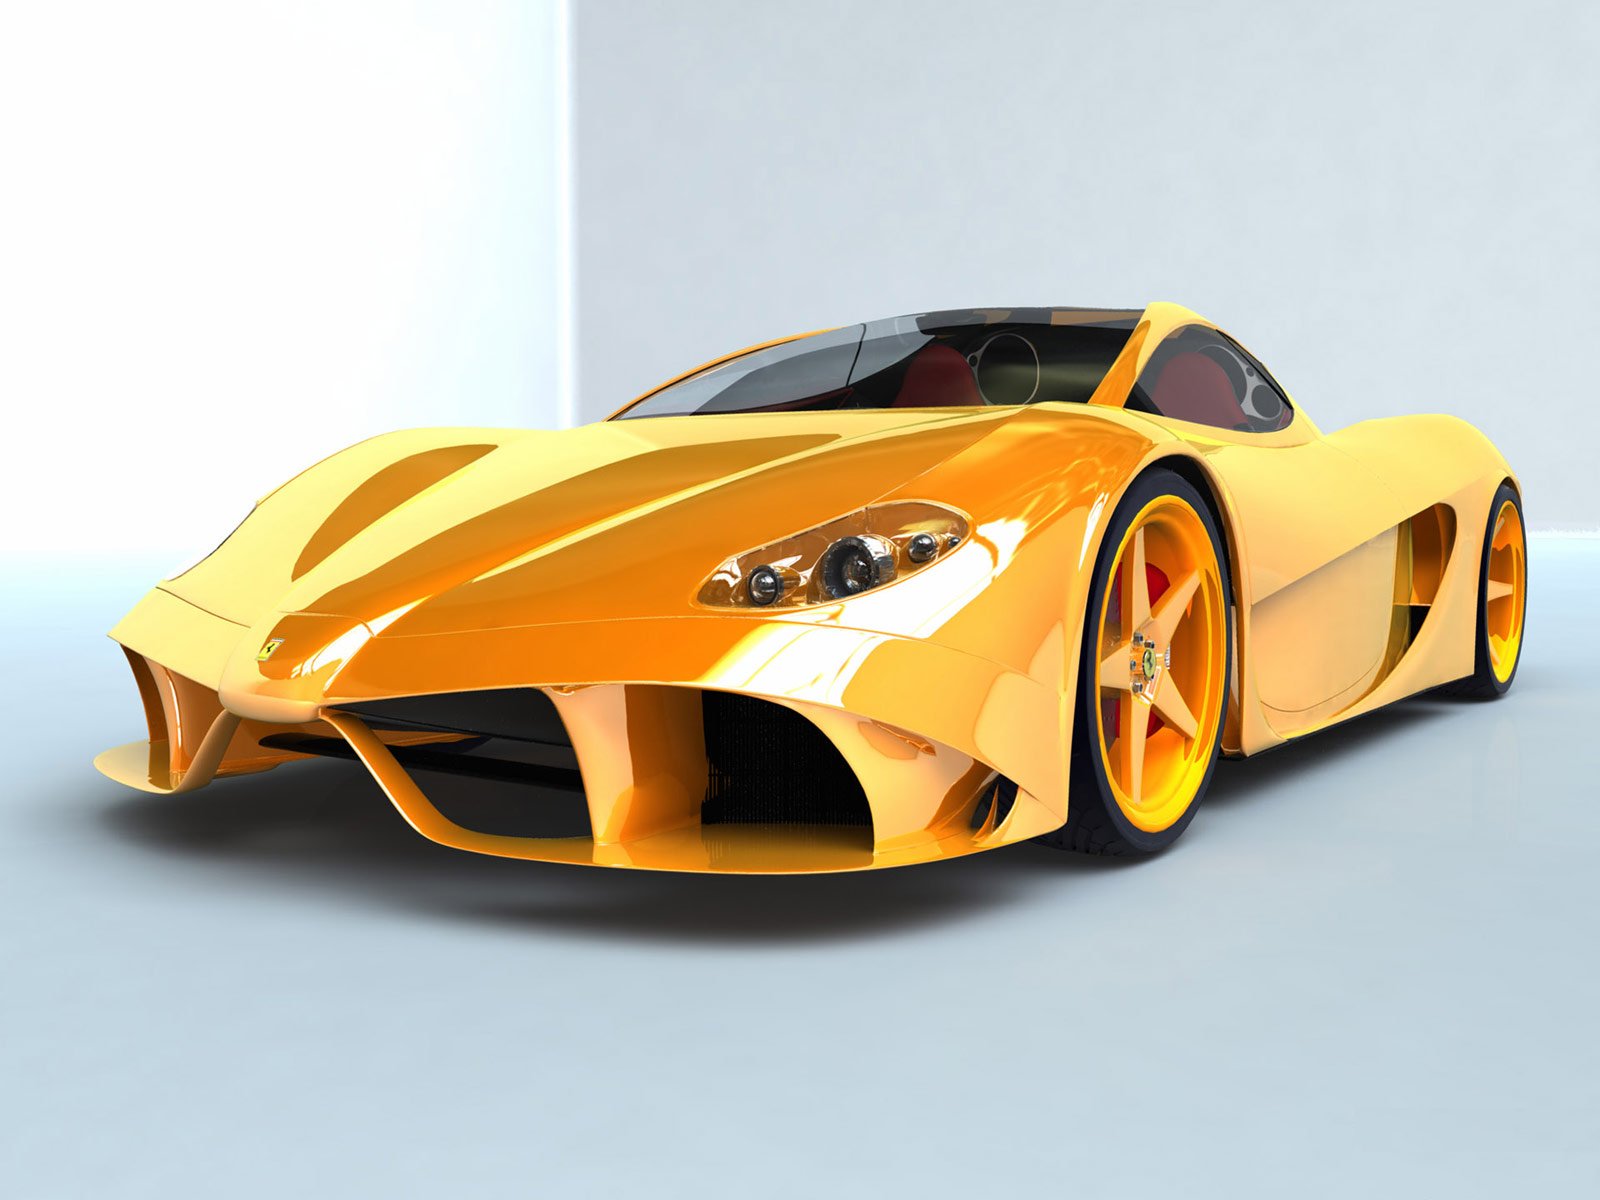 Modified Sports Cars Wallpaper Cool Car